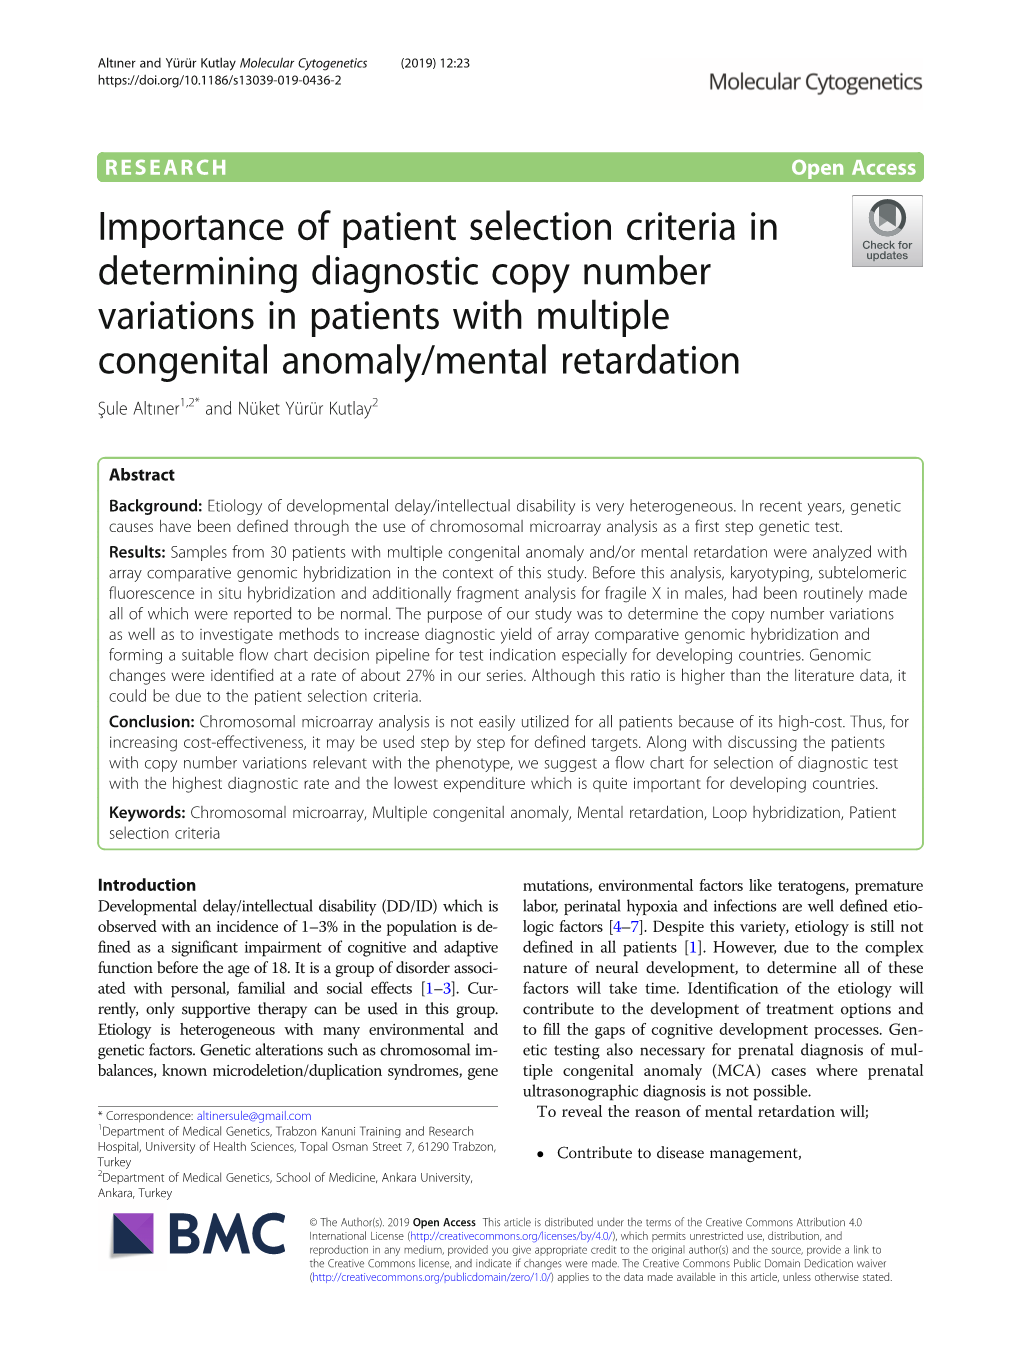 Importance of Patient Selection Criteria in Determining Diagnostic Copy